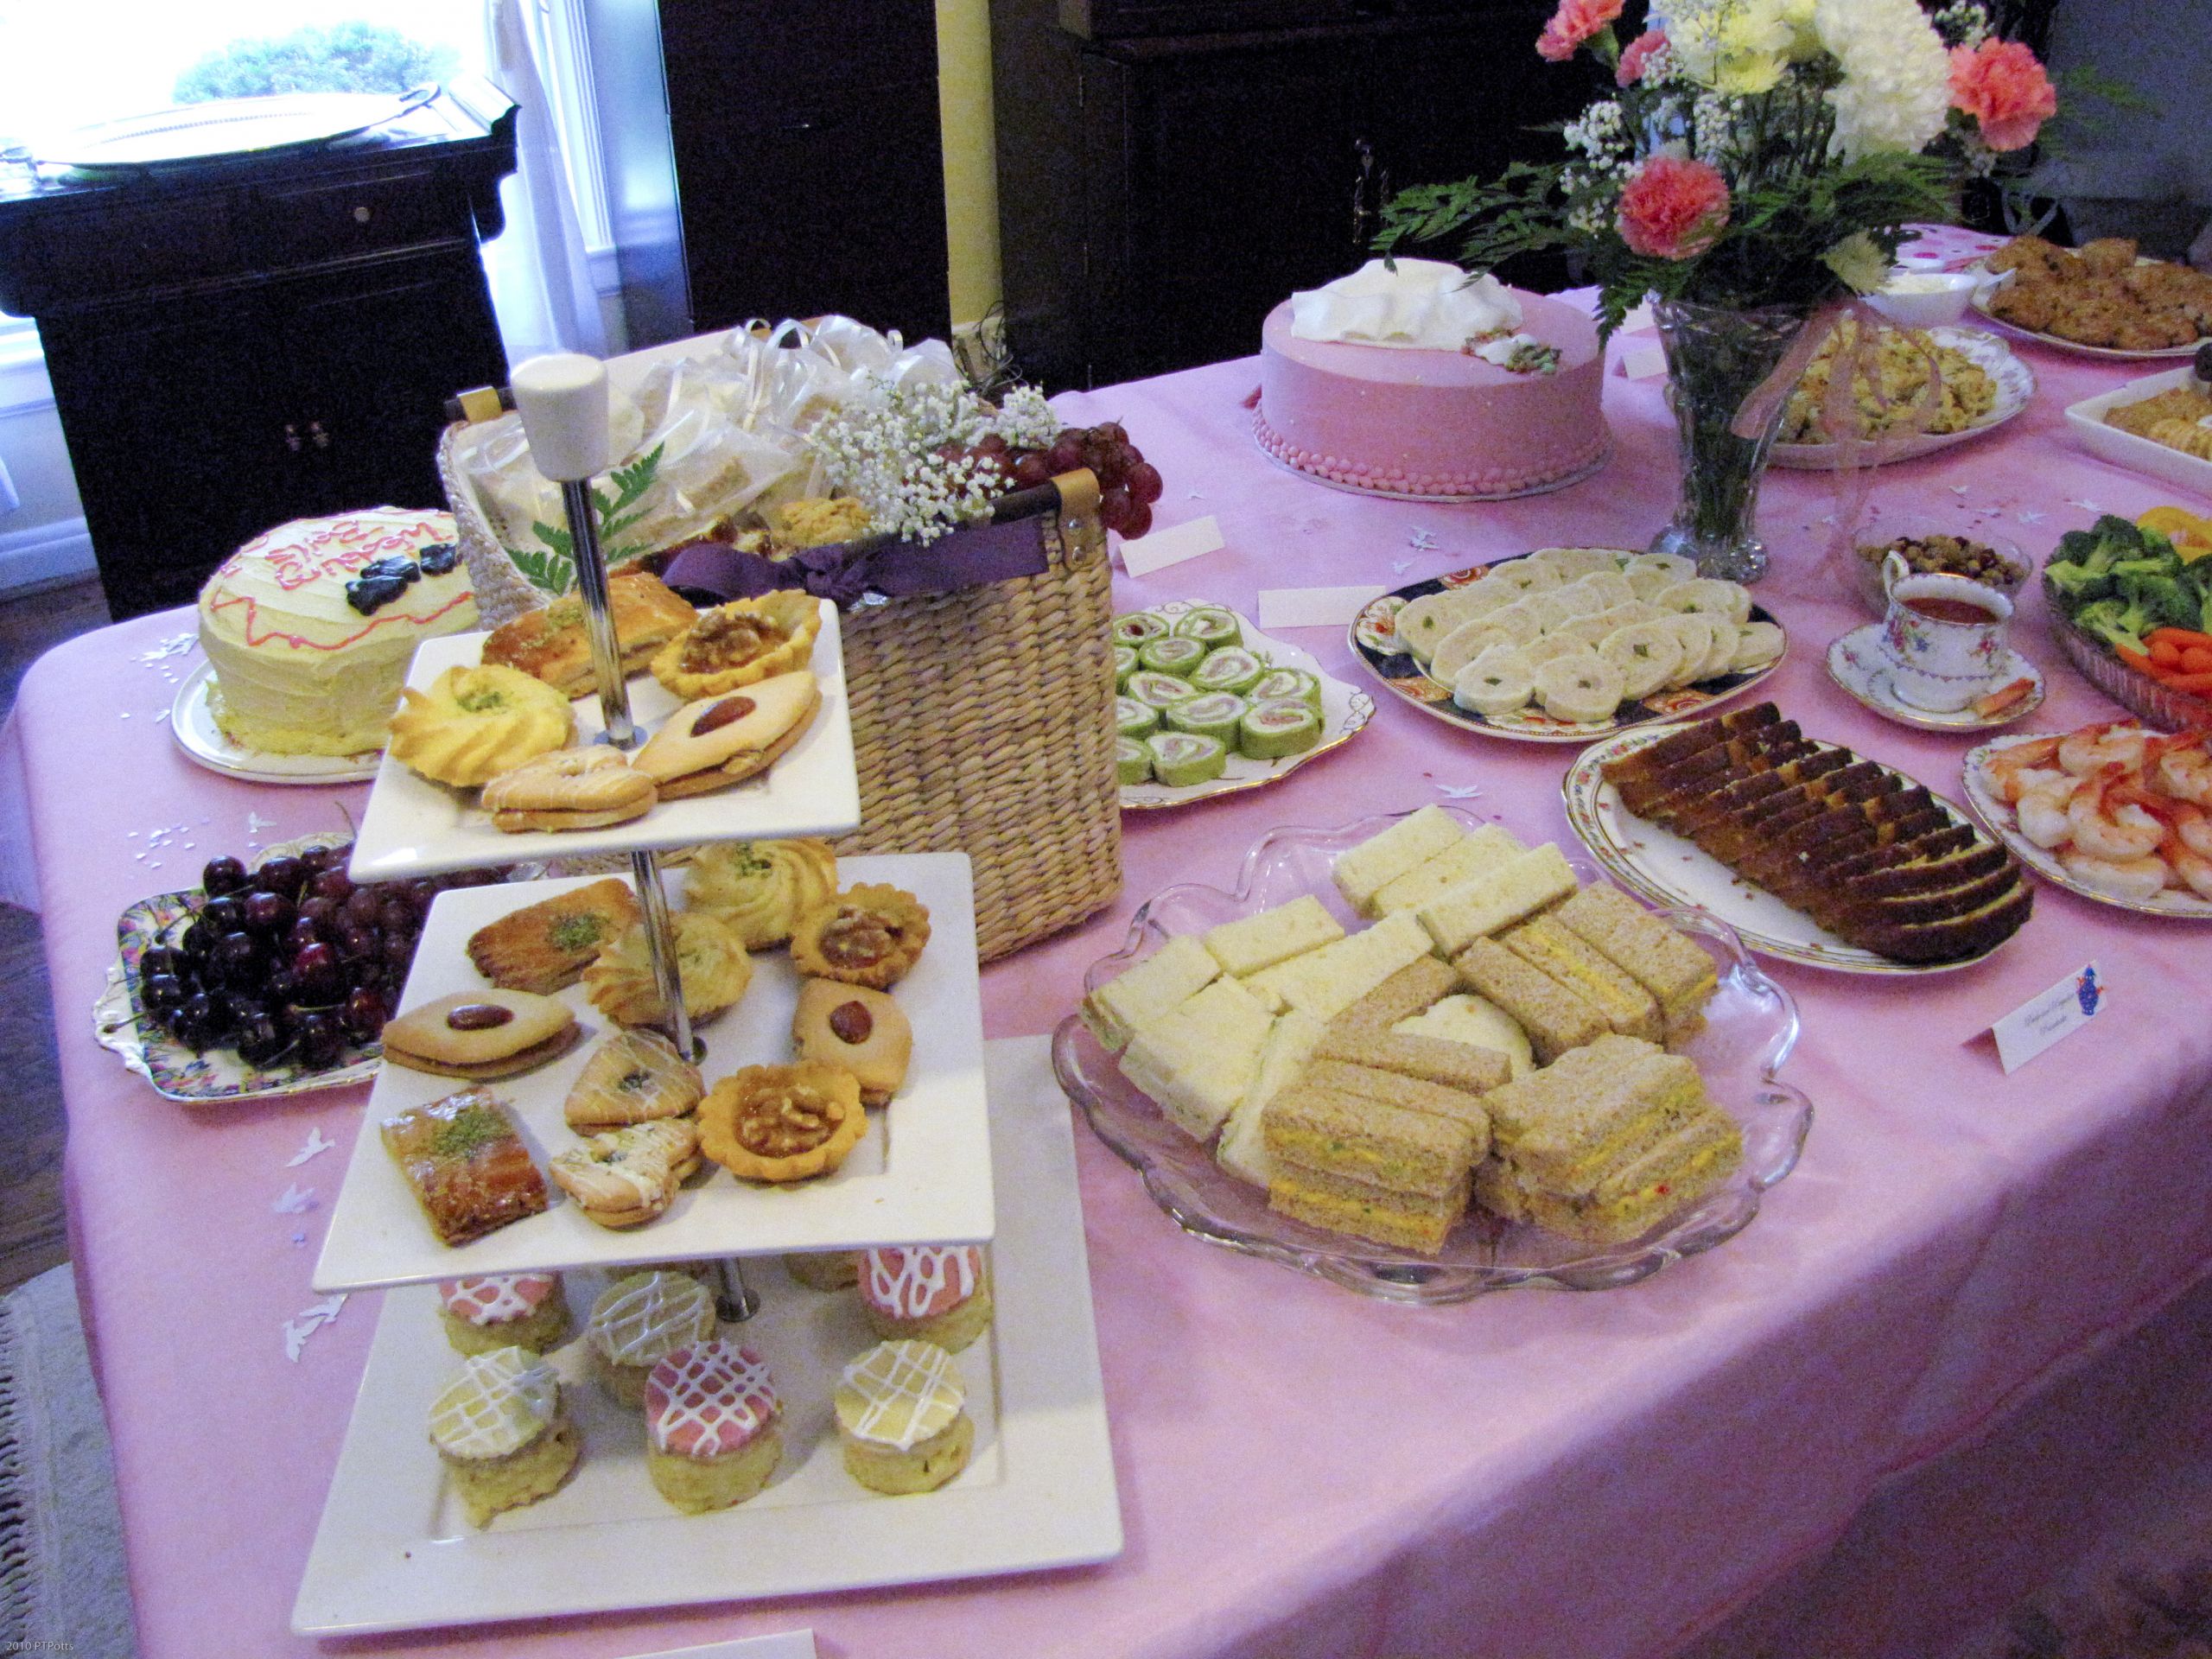 Food Ideas For Tea Party Bridal Shower
 A Jane Austen Tea Party Bridal Shower